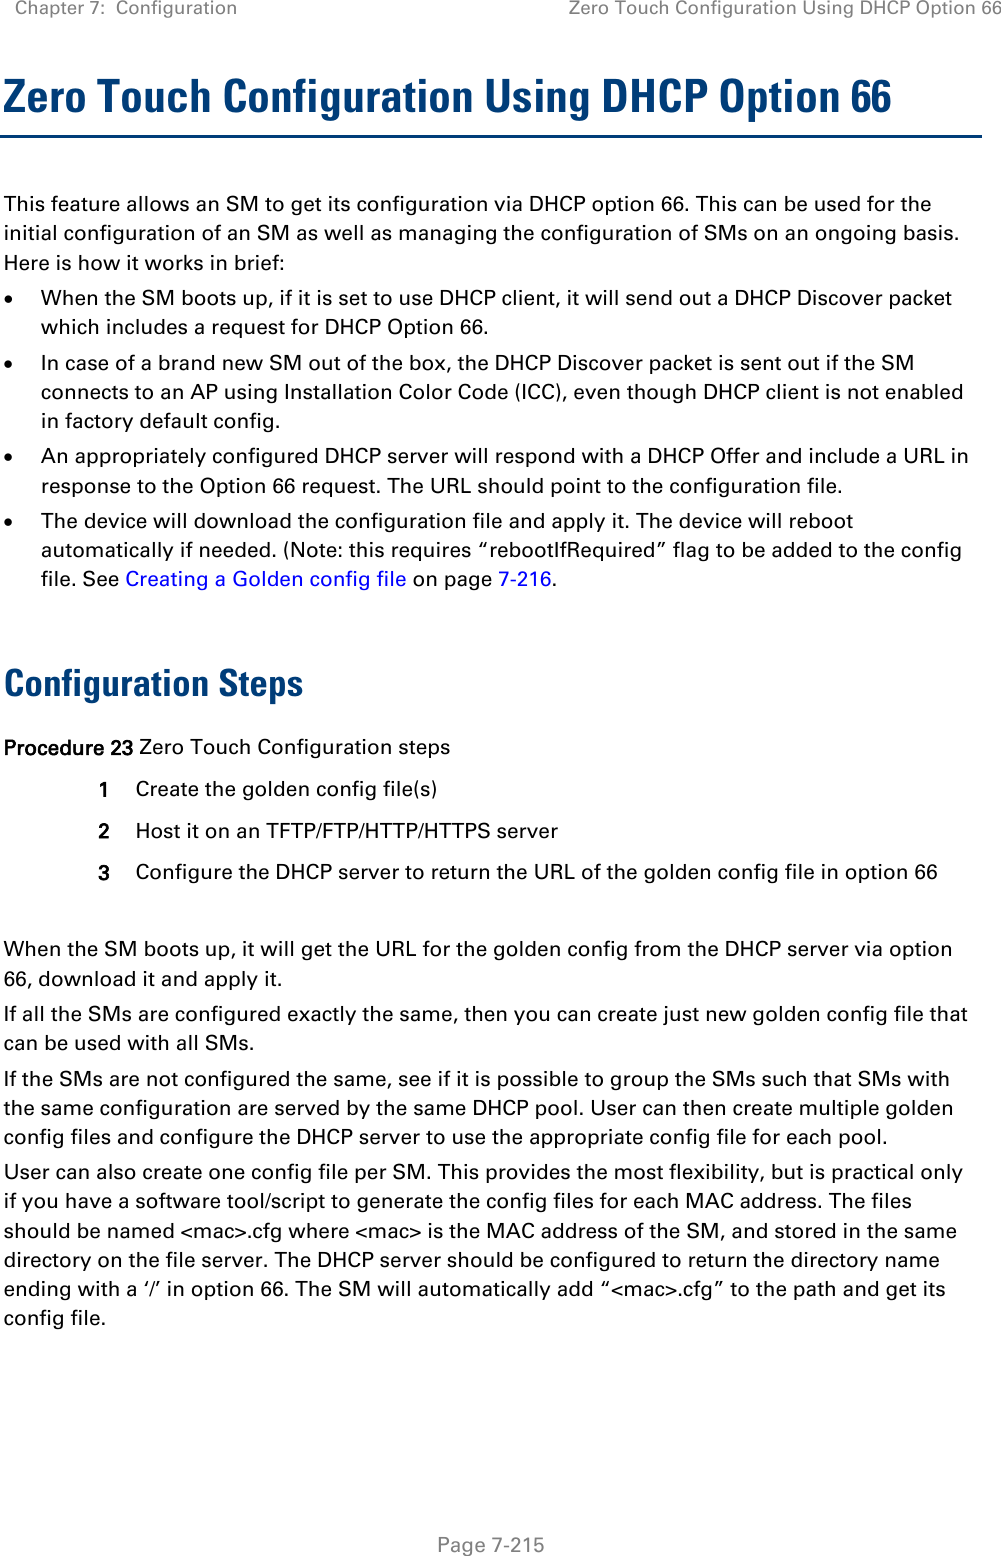 Chapter 7:  Configuration Zero Touch Configuration Using DHCP Option 66   Page 7-215 Zero Touch Configuration Using DHCP Option 66 This feature allows an SM to get its configuration via DHCP option 66. This can be used for the initial configuration of an SM as well as managing the configuration of SMs on an ongoing basis. Here is how it works in brief: • When the SM boots up, if it is set to use DHCP client, it will send out a DHCP Discover packet which includes a request for DHCP Option 66. • In case of a brand new SM out of the box, the DHCP Discover packet is sent out if the SM connects to an AP using Installation Color Code (ICC), even though DHCP client is not enabled in factory default config.  • An appropriately configured DHCP server will respond with a DHCP Offer and include a URL in response to the Option 66 request. The URL should point to the configuration file. • The device will download the configuration file and apply it. The device will reboot automatically if needed. (Note: this requires “rebootIfRequired” flag to be added to the config file. See Creating a Golden config file on page 7-216.  Configuration Steps Procedure 23 Zero Touch Configuration steps 1 Create the golden config file(s) 2 Host it on an TFTP/FTP/HTTP/HTTPS server 3 Configure the DHCP server to return the URL of the golden config file in option 66  When the SM boots up, it will get the URL for the golden config from the DHCP server via option 66, download it and apply it. If all the SMs are configured exactly the same, then you can create just new golden config file that can be used with all SMs.  If the SMs are not configured the same, see if it is possible to group the SMs such that SMs with the same configuration are served by the same DHCP pool. User can then create multiple golden config files and configure the DHCP server to use the appropriate config file for each pool. User can also create one config file per SM. This provides the most flexibility, but is practical only if you have a software tool/script to generate the config files for each MAC address. The files should be named &lt;mac&gt;.cfg where &lt;mac&gt; is the MAC address of the SM, and stored in the same directory on the file server. The DHCP server should be configured to return the directory name ending with a ‘/’ in option 66. The SM will automatically add “&lt;mac&gt;.cfg” to the path and get its config file. 